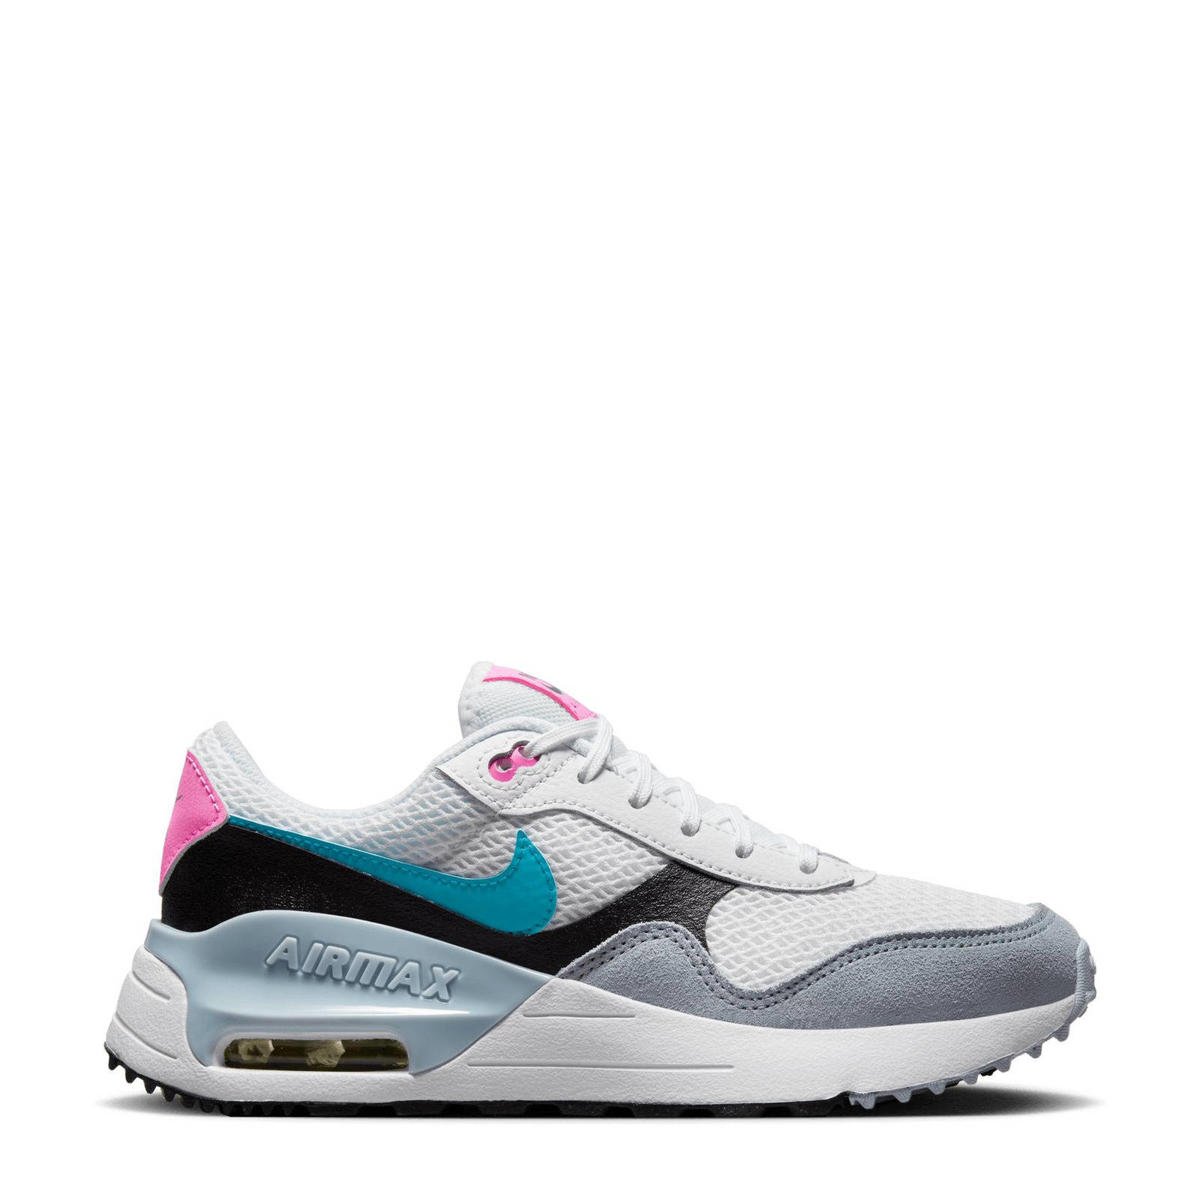 procent ondergoed Wissen Nike Air Max Systm sneakers wit/roze/turquoise/blauw | wehkamp